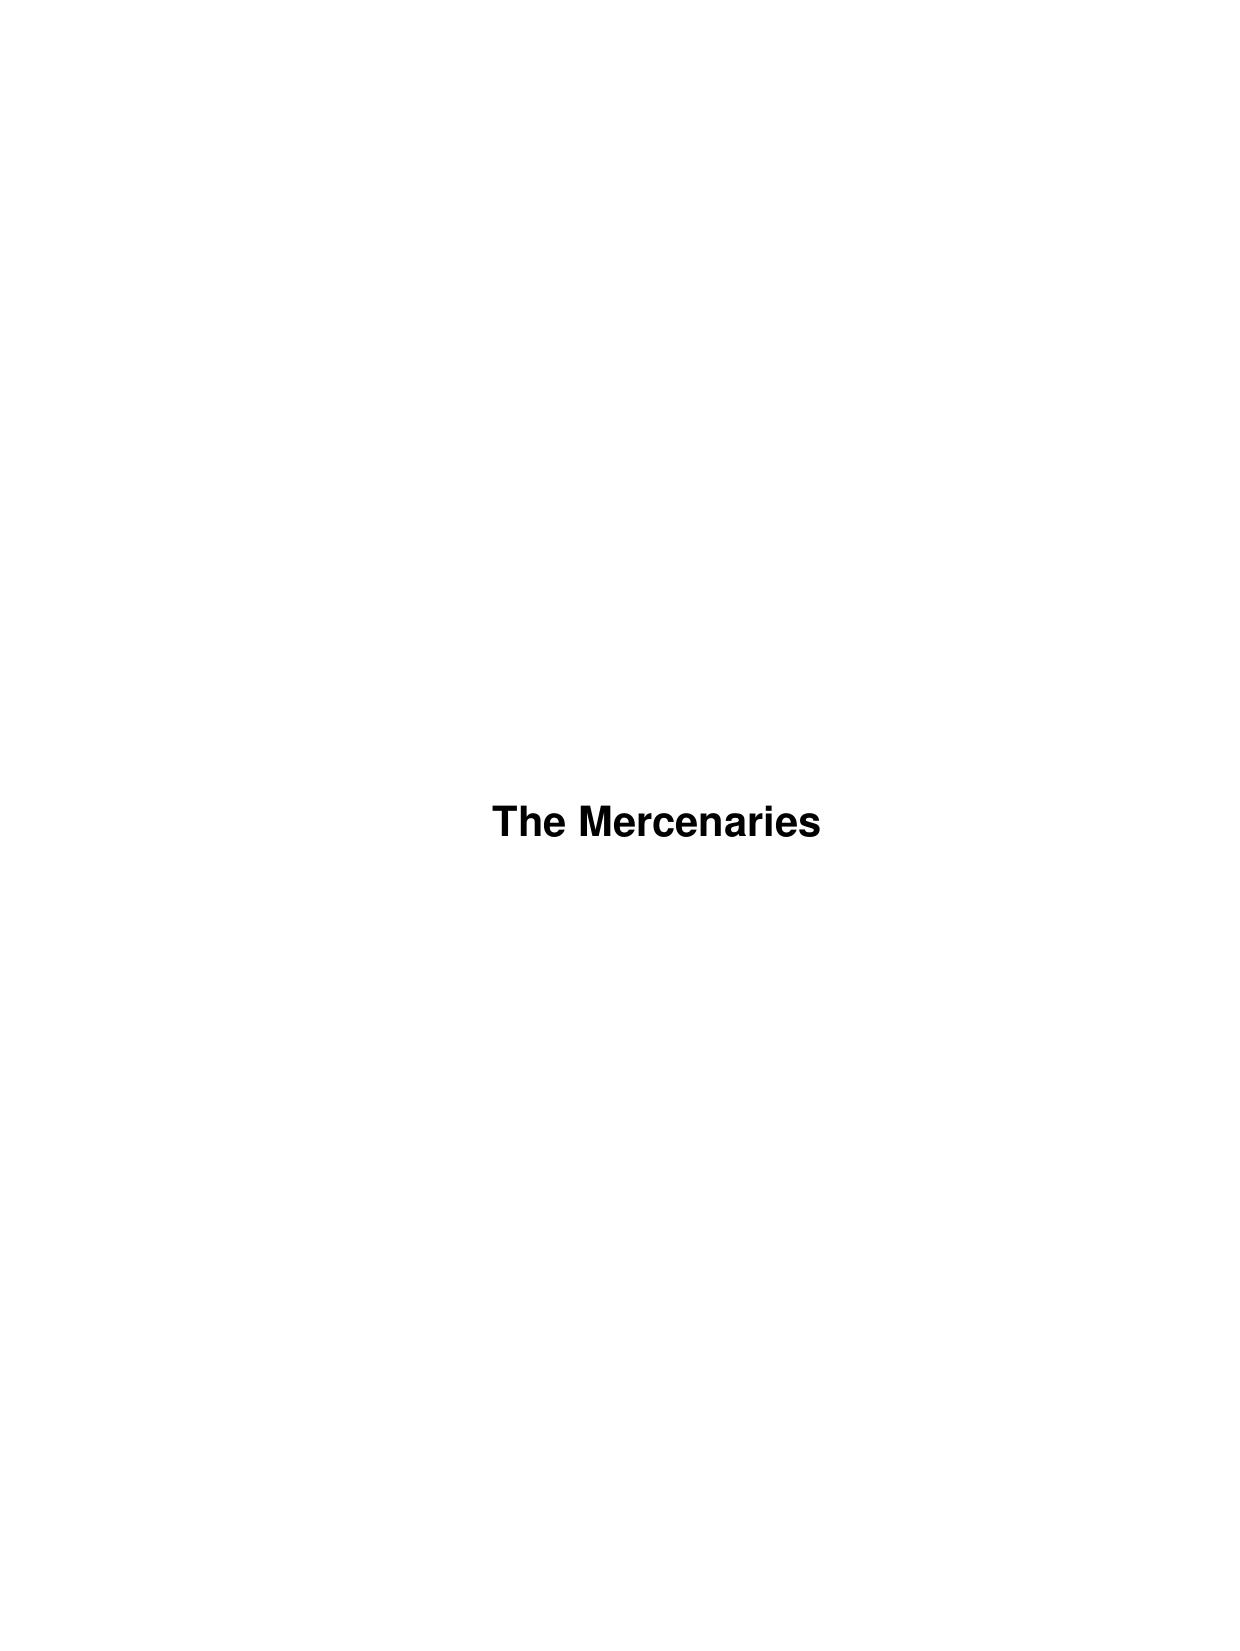 The Mercenaries by Unknown